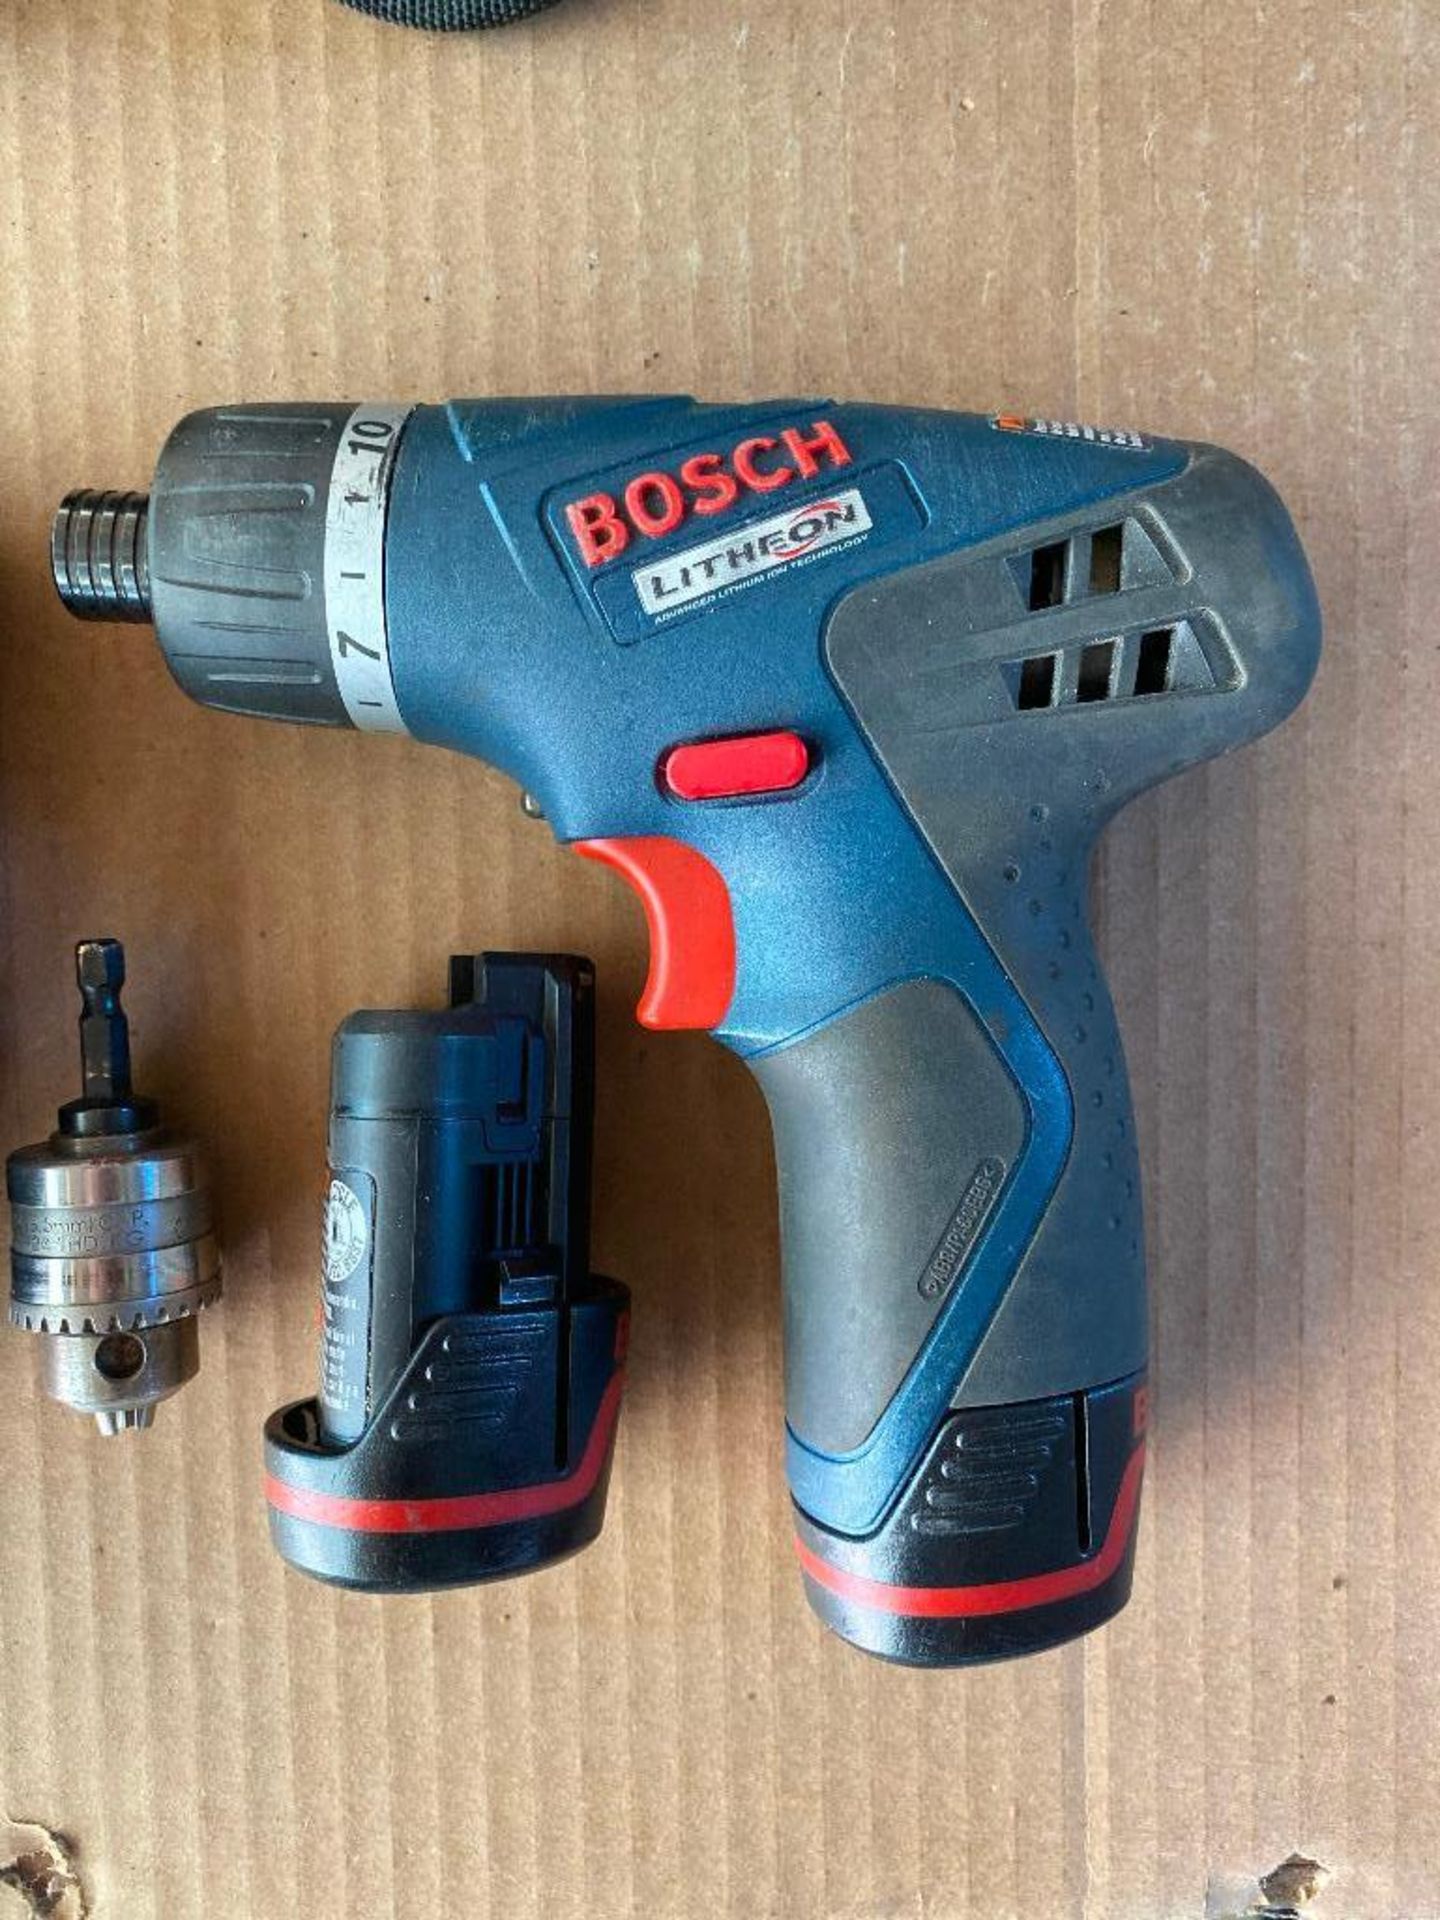 DESCRIPTION BOSCH 12V 1/4" CORDLESS IMPACT DRIVER KIT (INCLUDES CHARGER, (2) BATTERIES AND IMPACT DR - Image 2 of 3